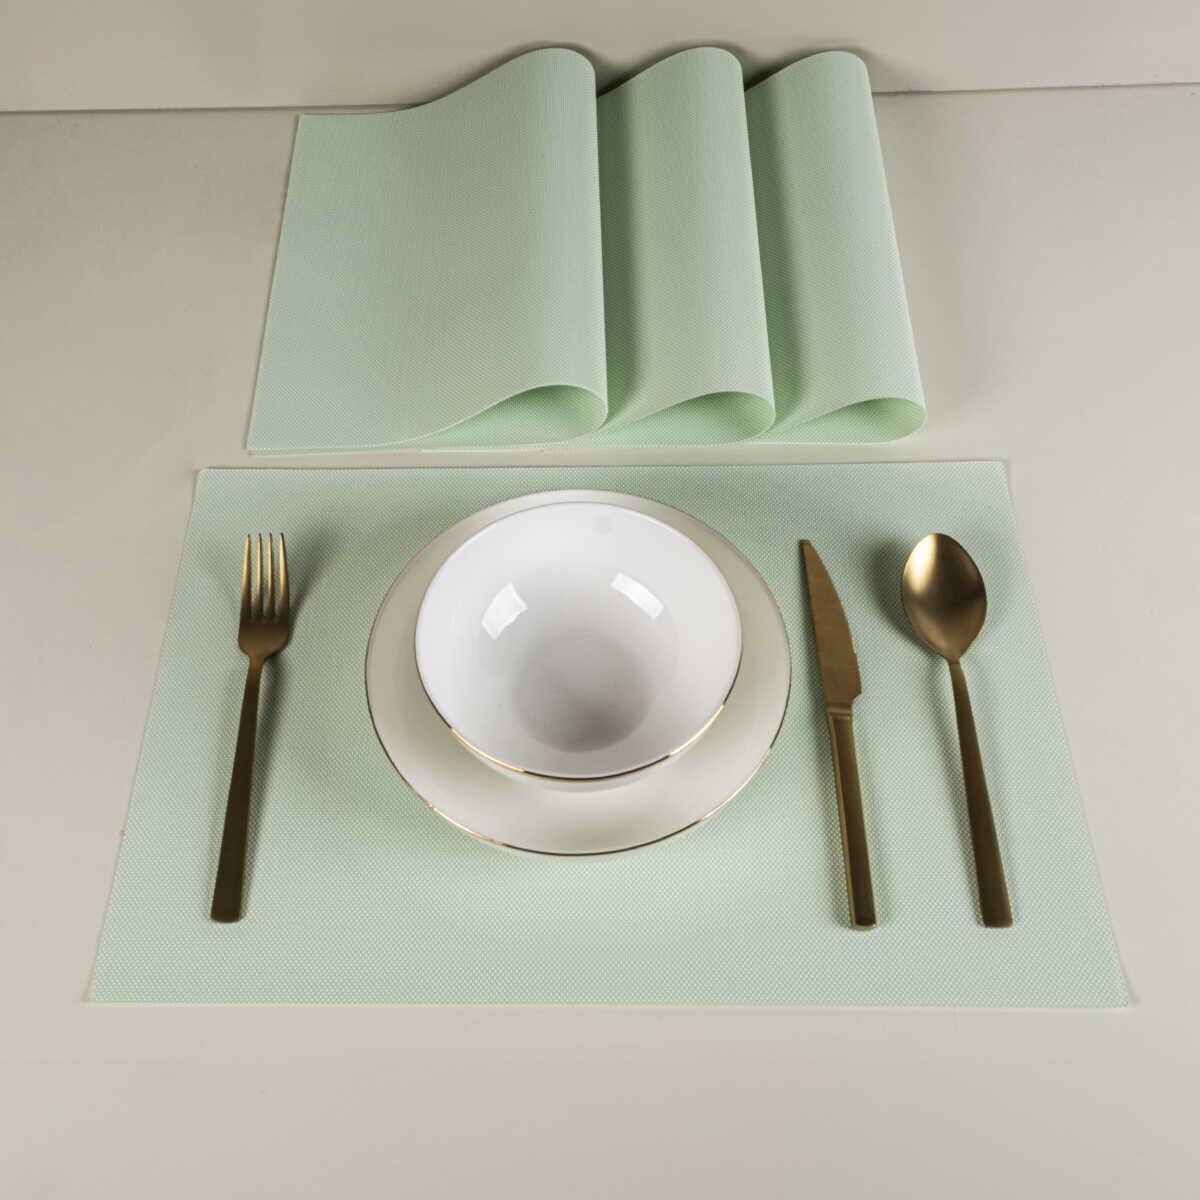 Maxstyle Harmony Moss 4 Piece Placemat Set 30x45 cm